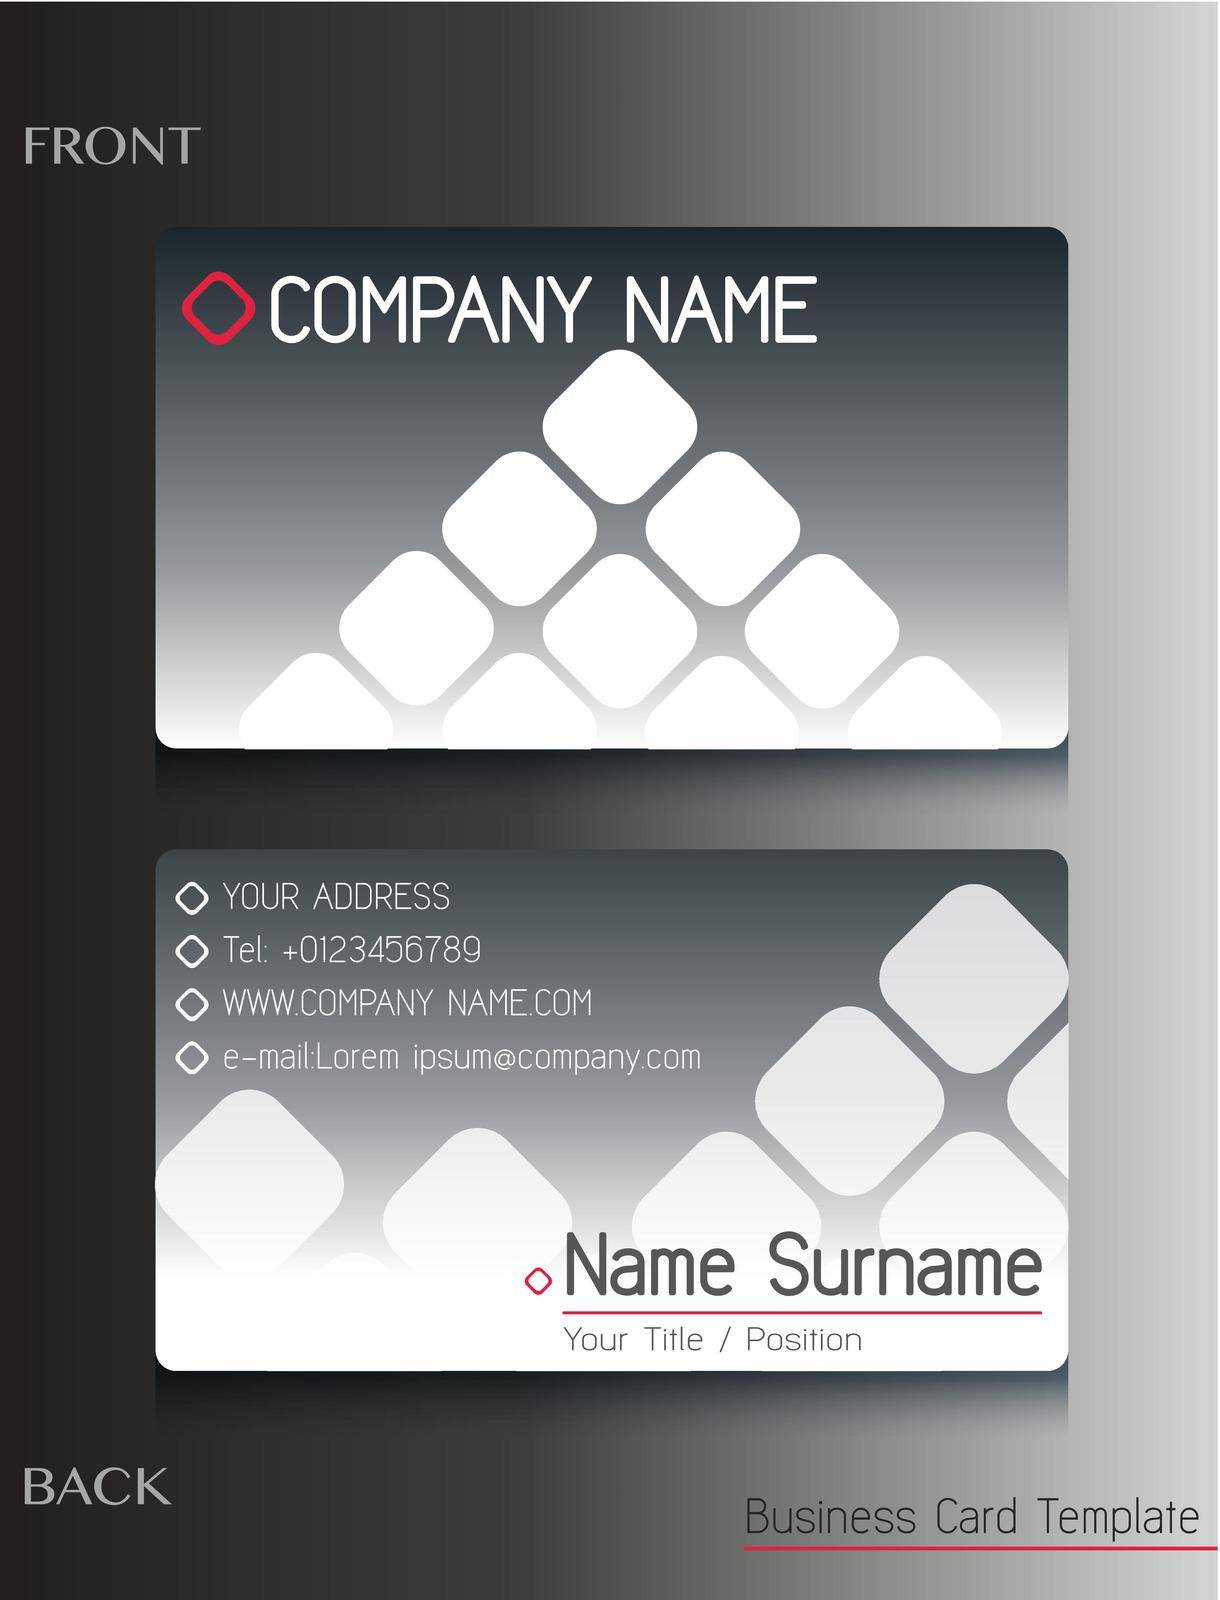 A grey colored business card by iimages